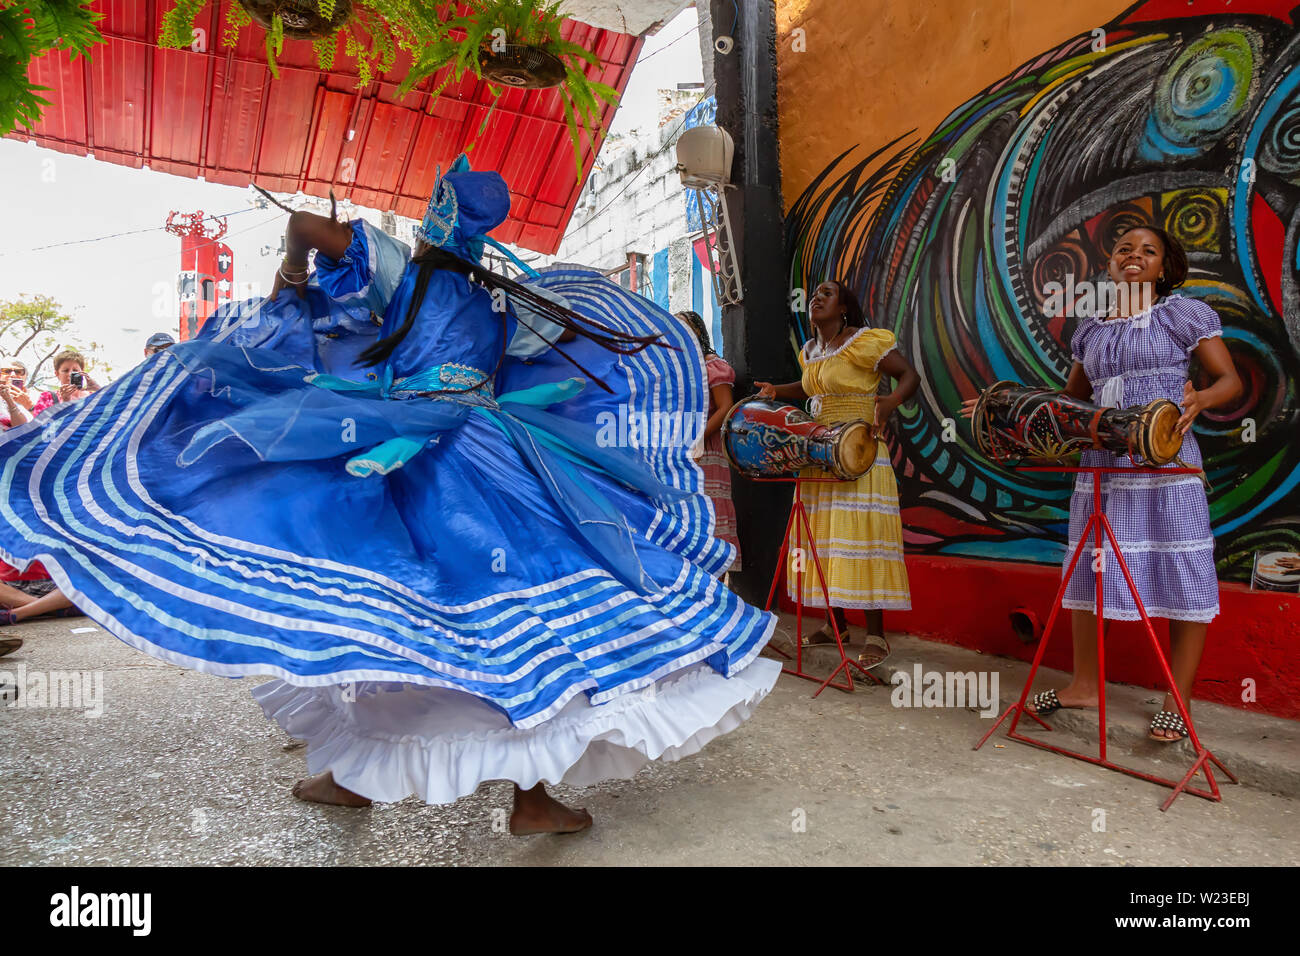 Havana, Cuba - May 29, 2019: Cuban people are performing an African Dance in the Old Havana City, Capital of Cuba, during a bright and sunny day. Stock Photo